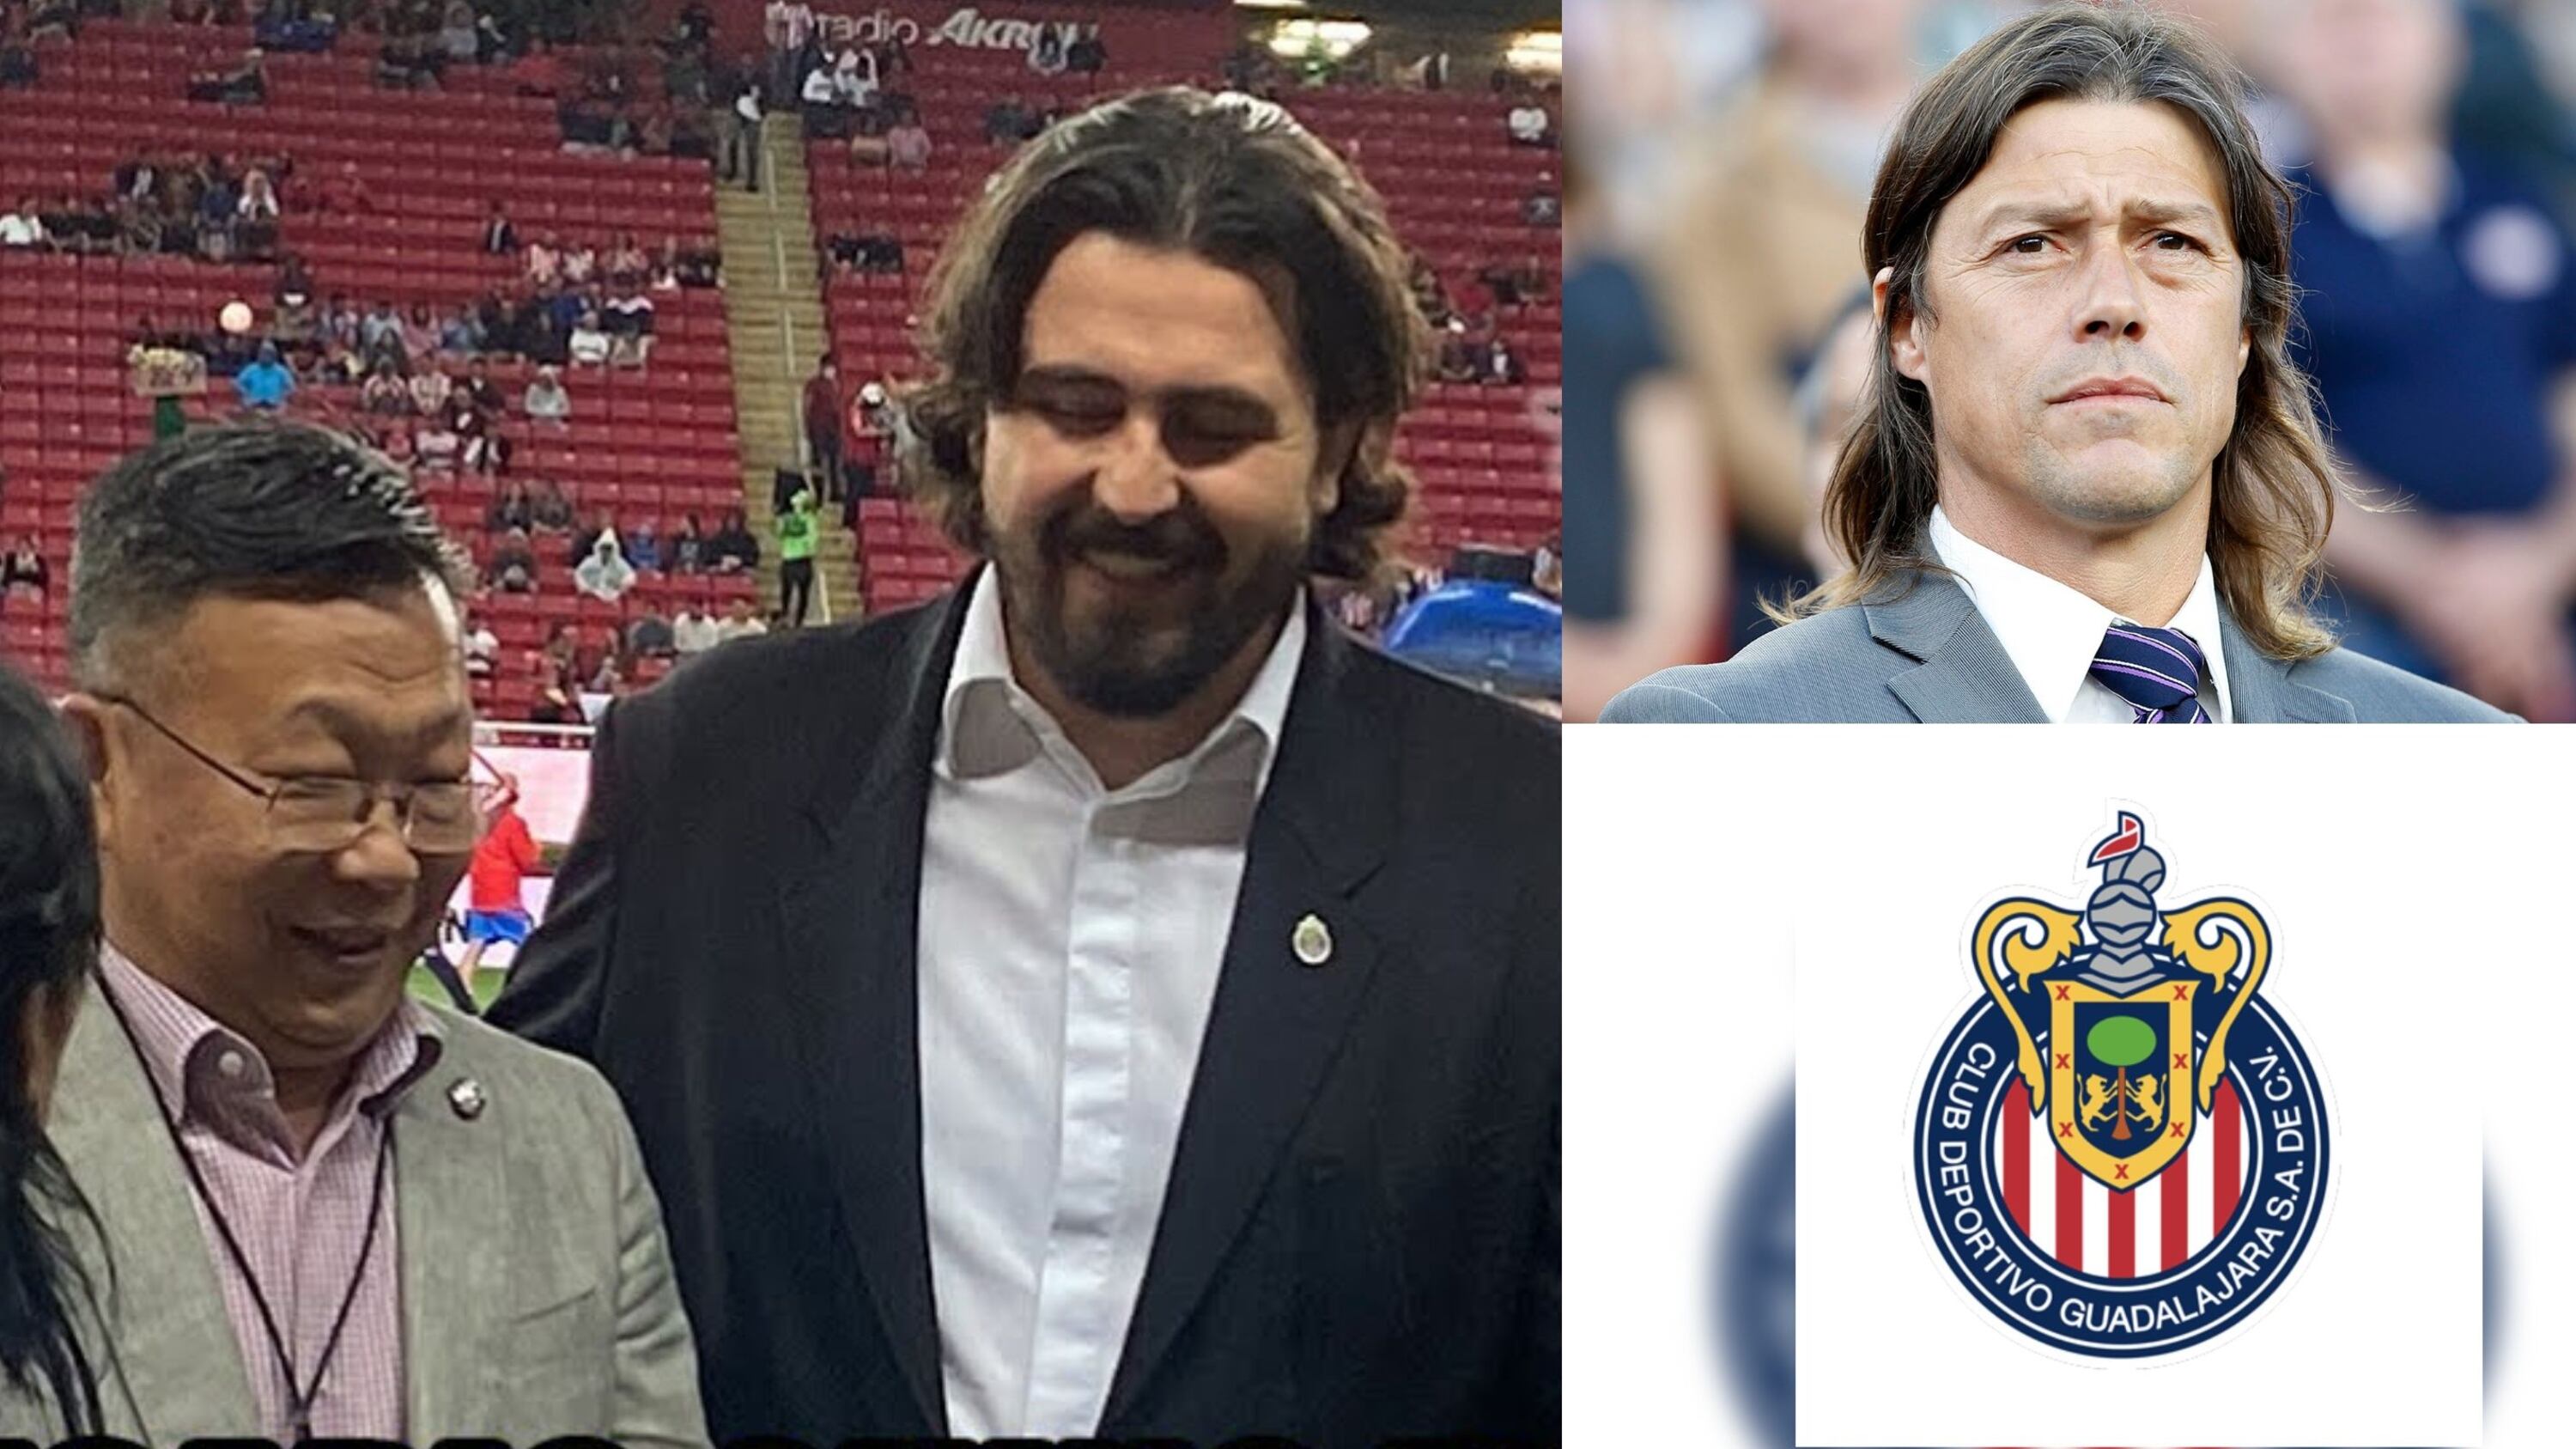 He found out there´s chinese investment, Almeyda and what he would ask to return